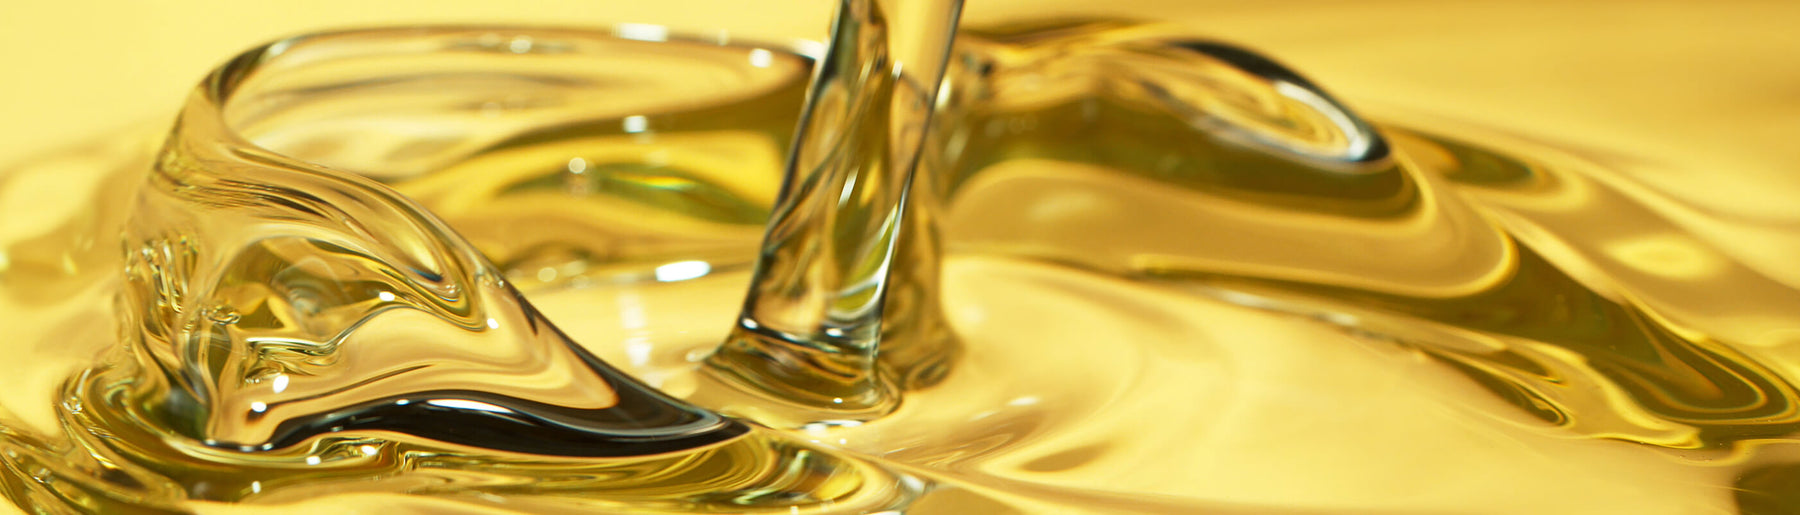 The science of massage oils